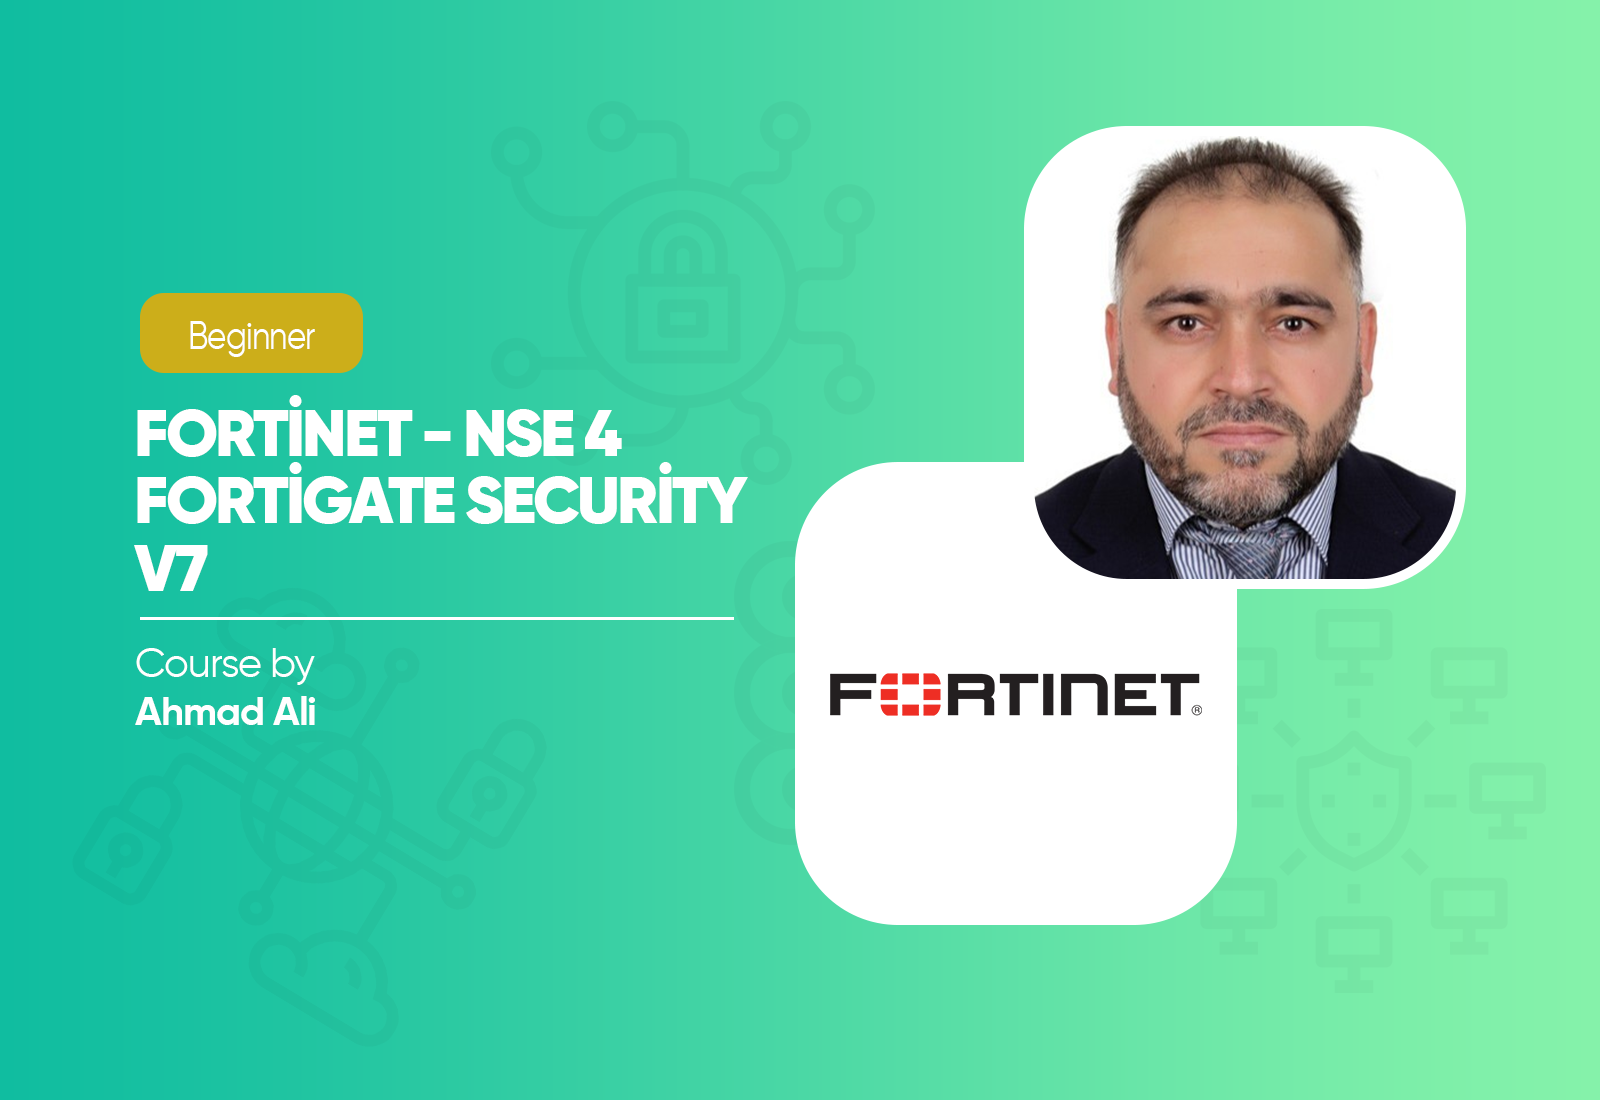 Fortinet - NSE 4 FortiGate Security v7 Course